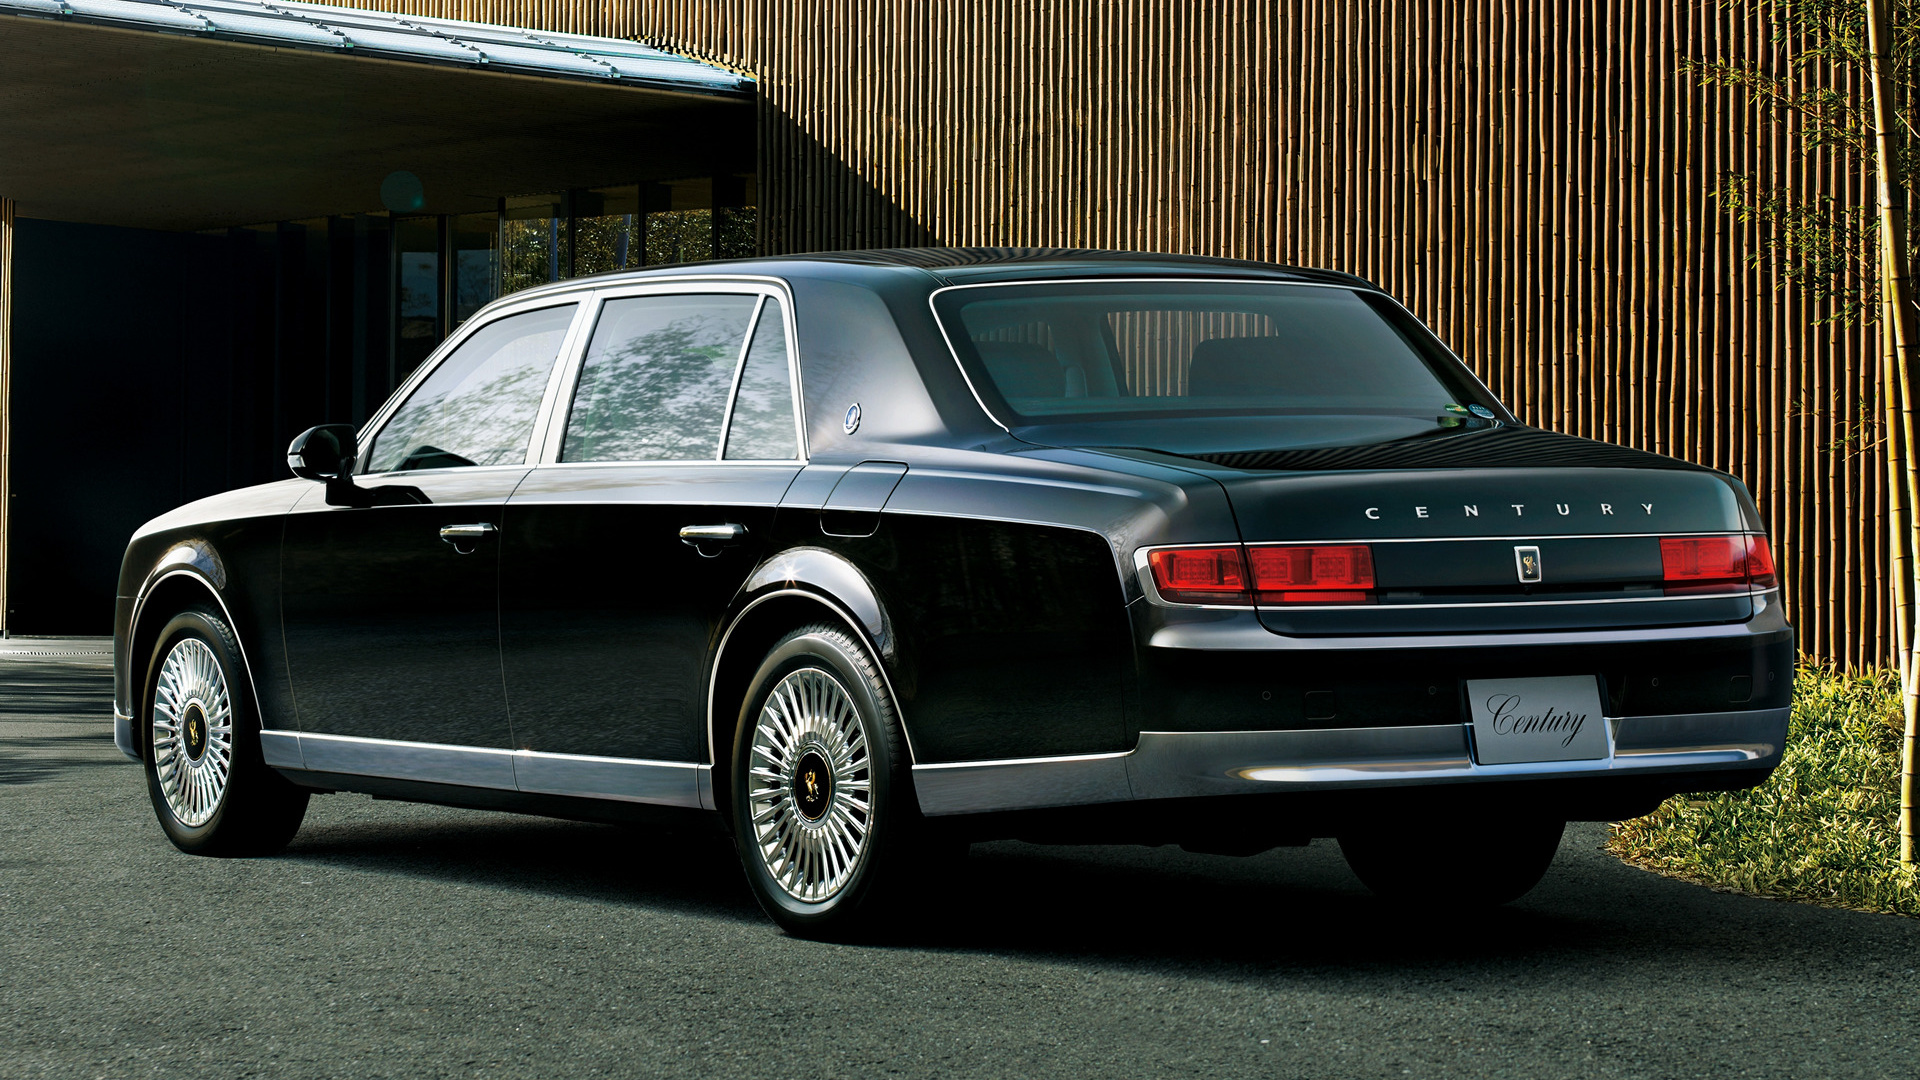 Toyota Century and HD Image